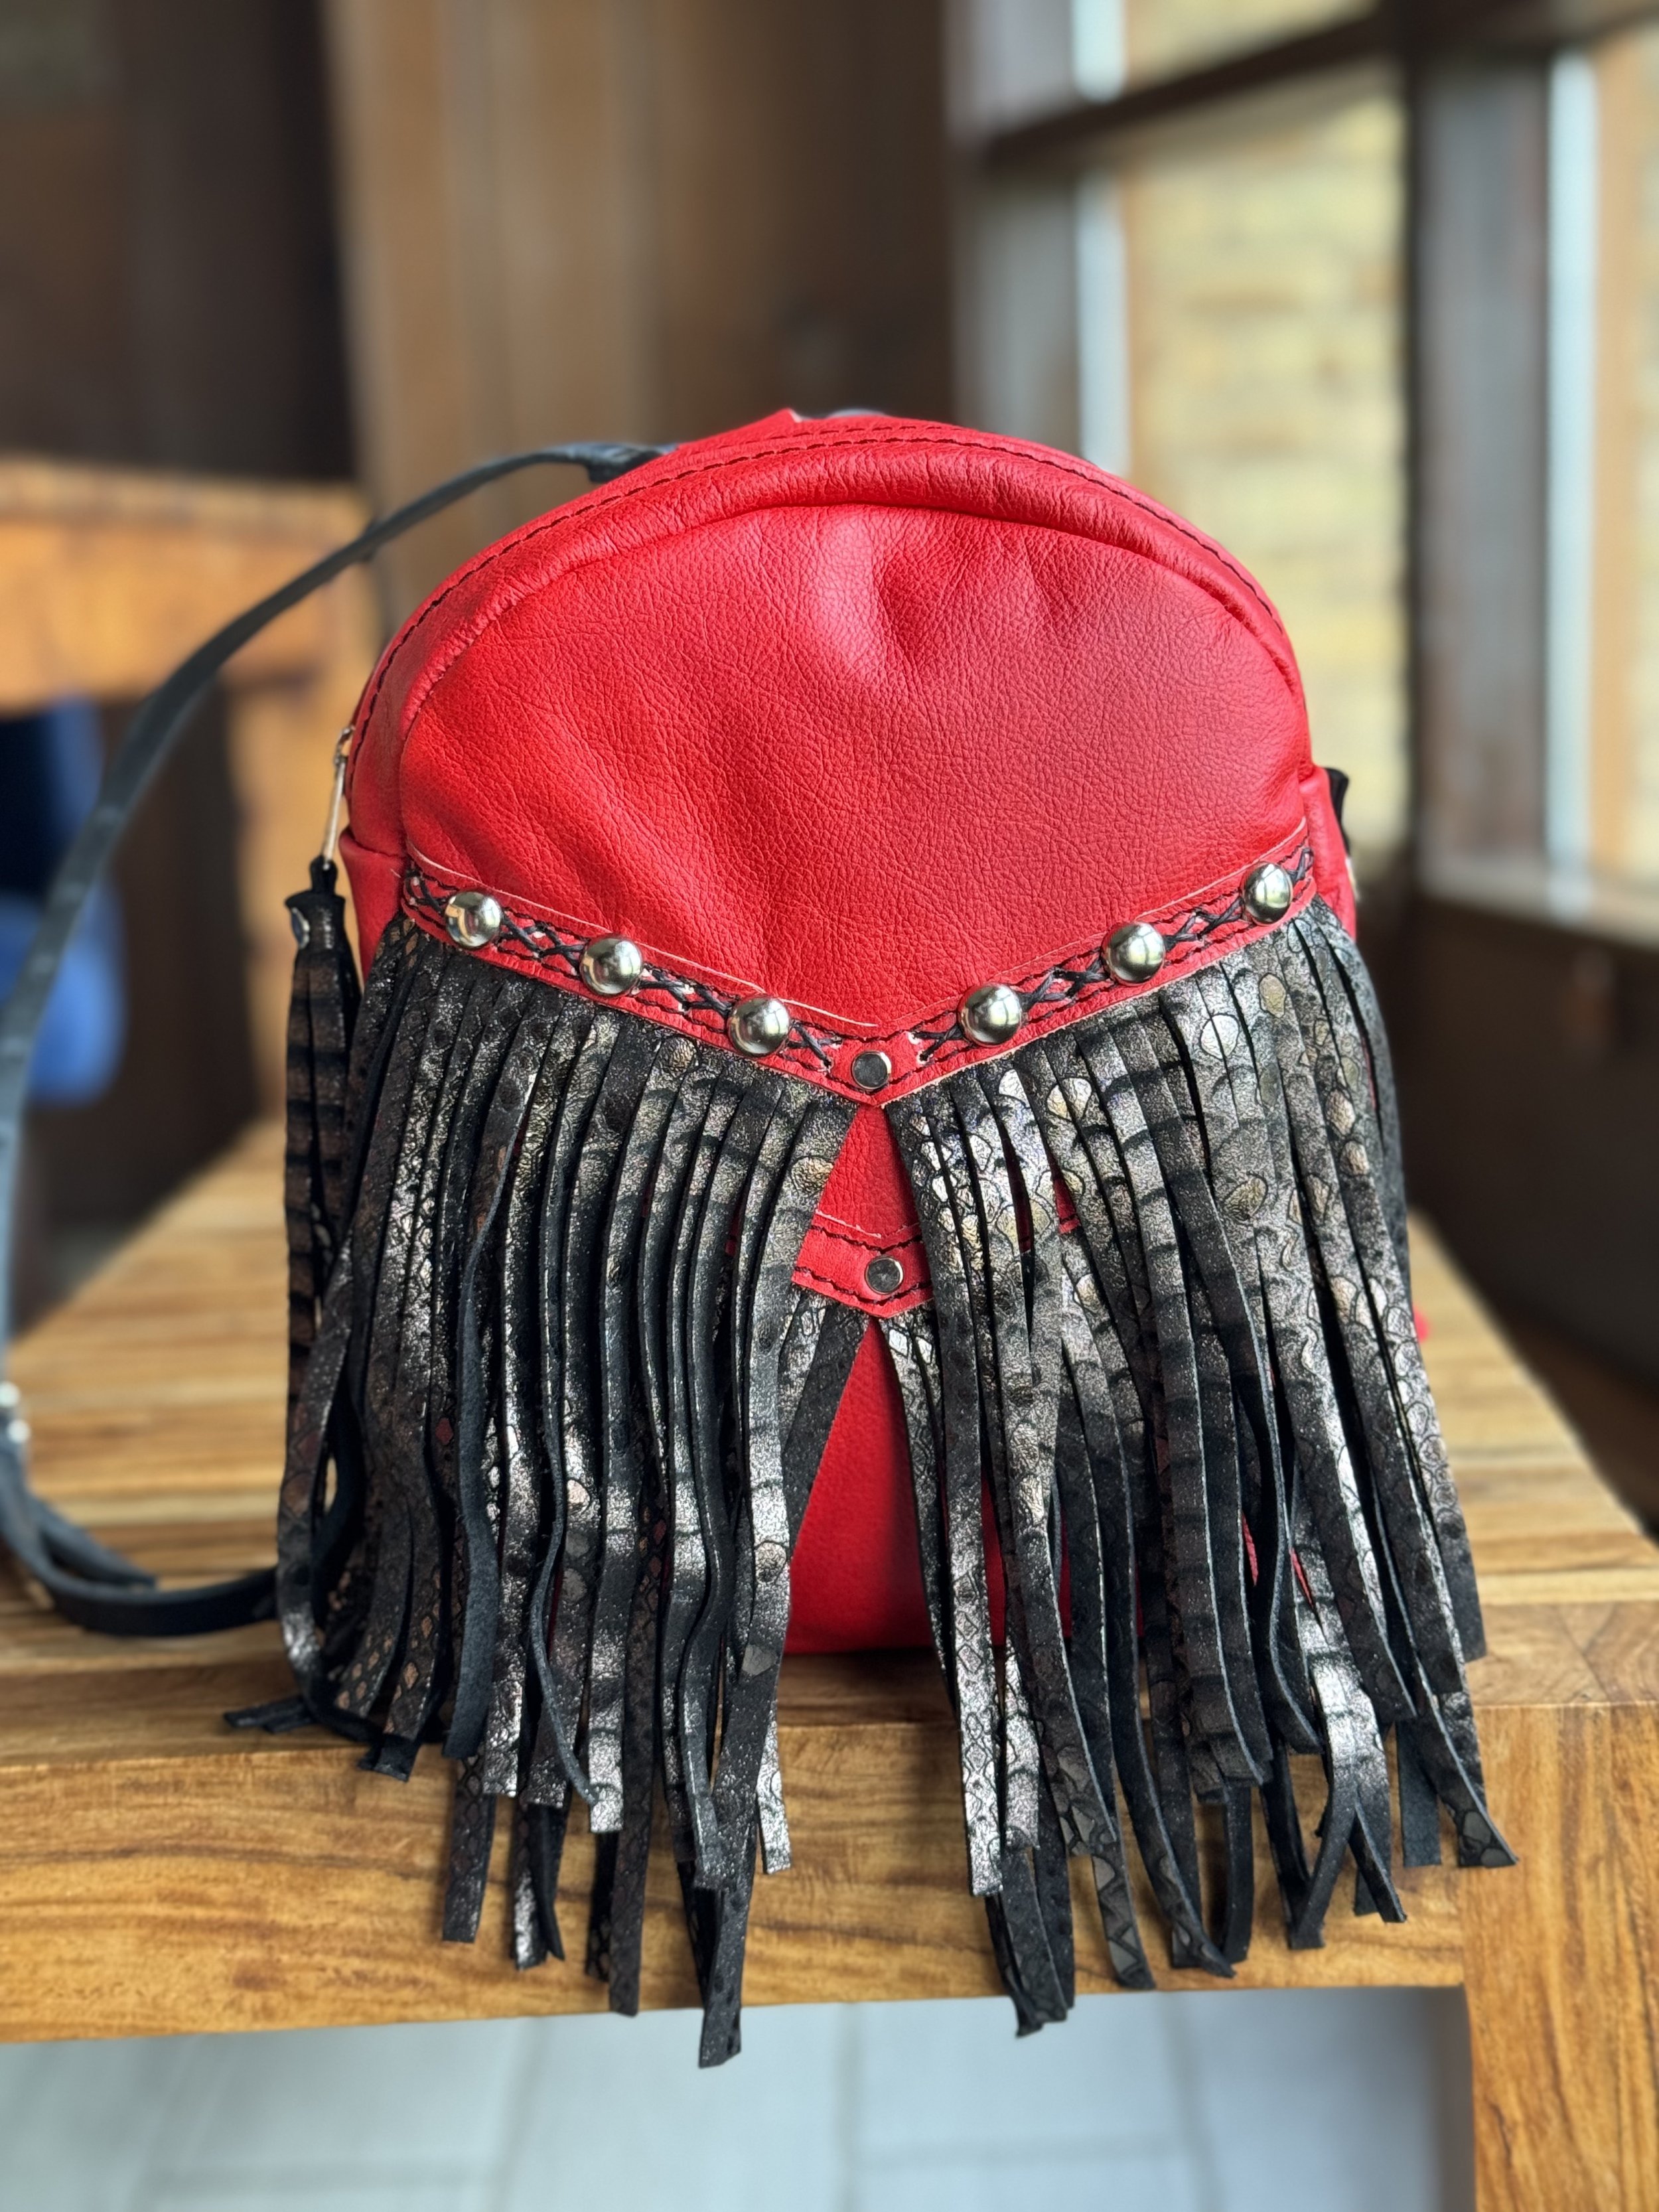 Hand Dyed Red leather body, Black Python leather fringe, Black Criss Cross Handsitching, Nickel hardware, Studs, Flair D Ring - Mini Backpack